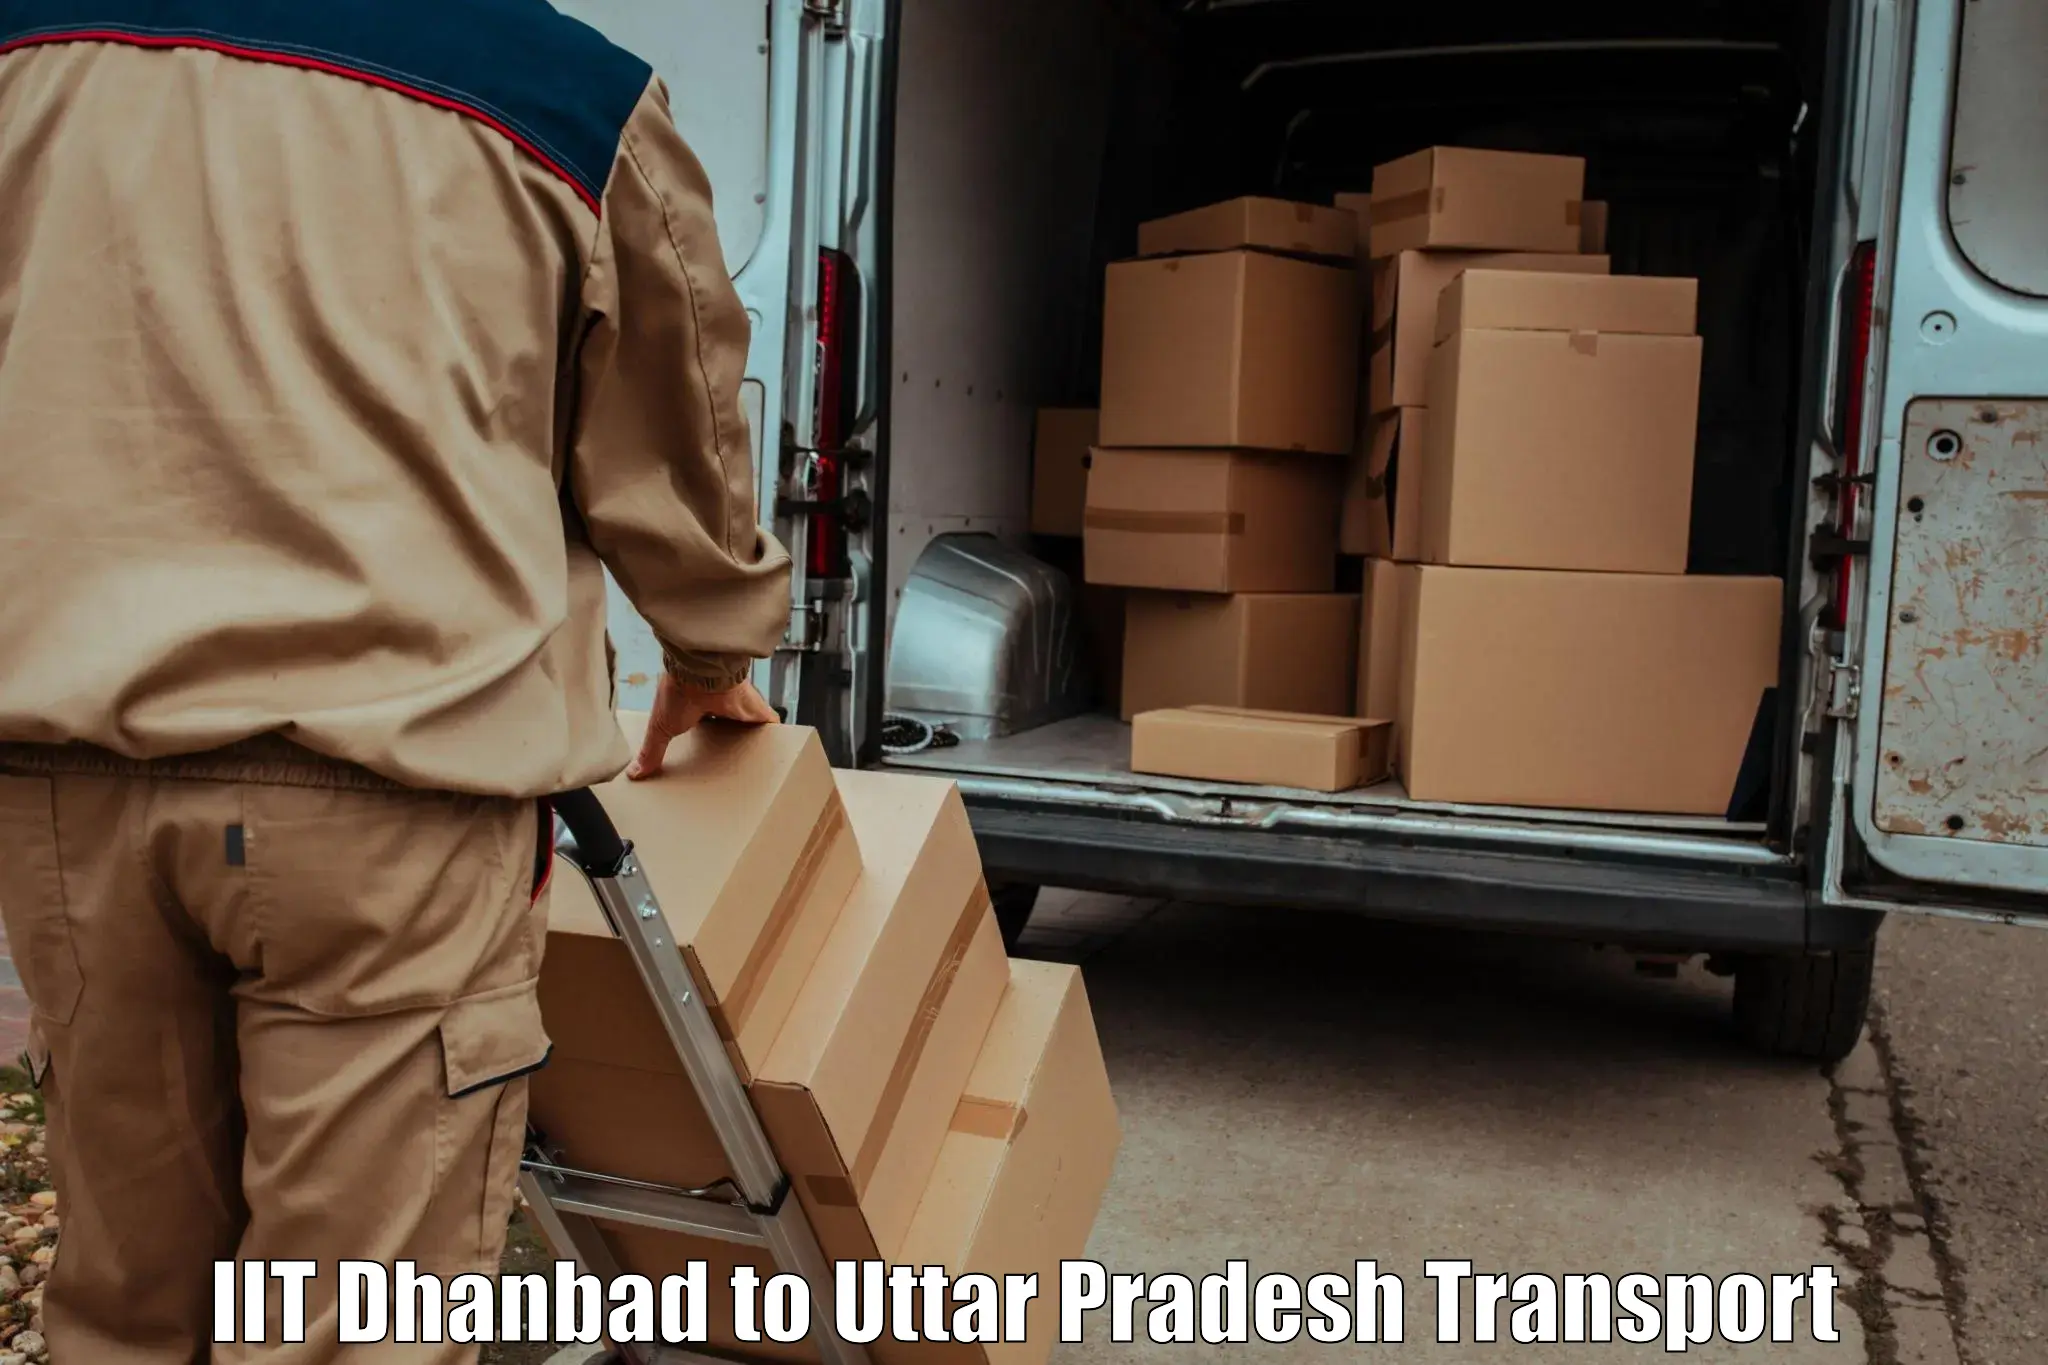 Online transport booking IIT Dhanbad to Agra